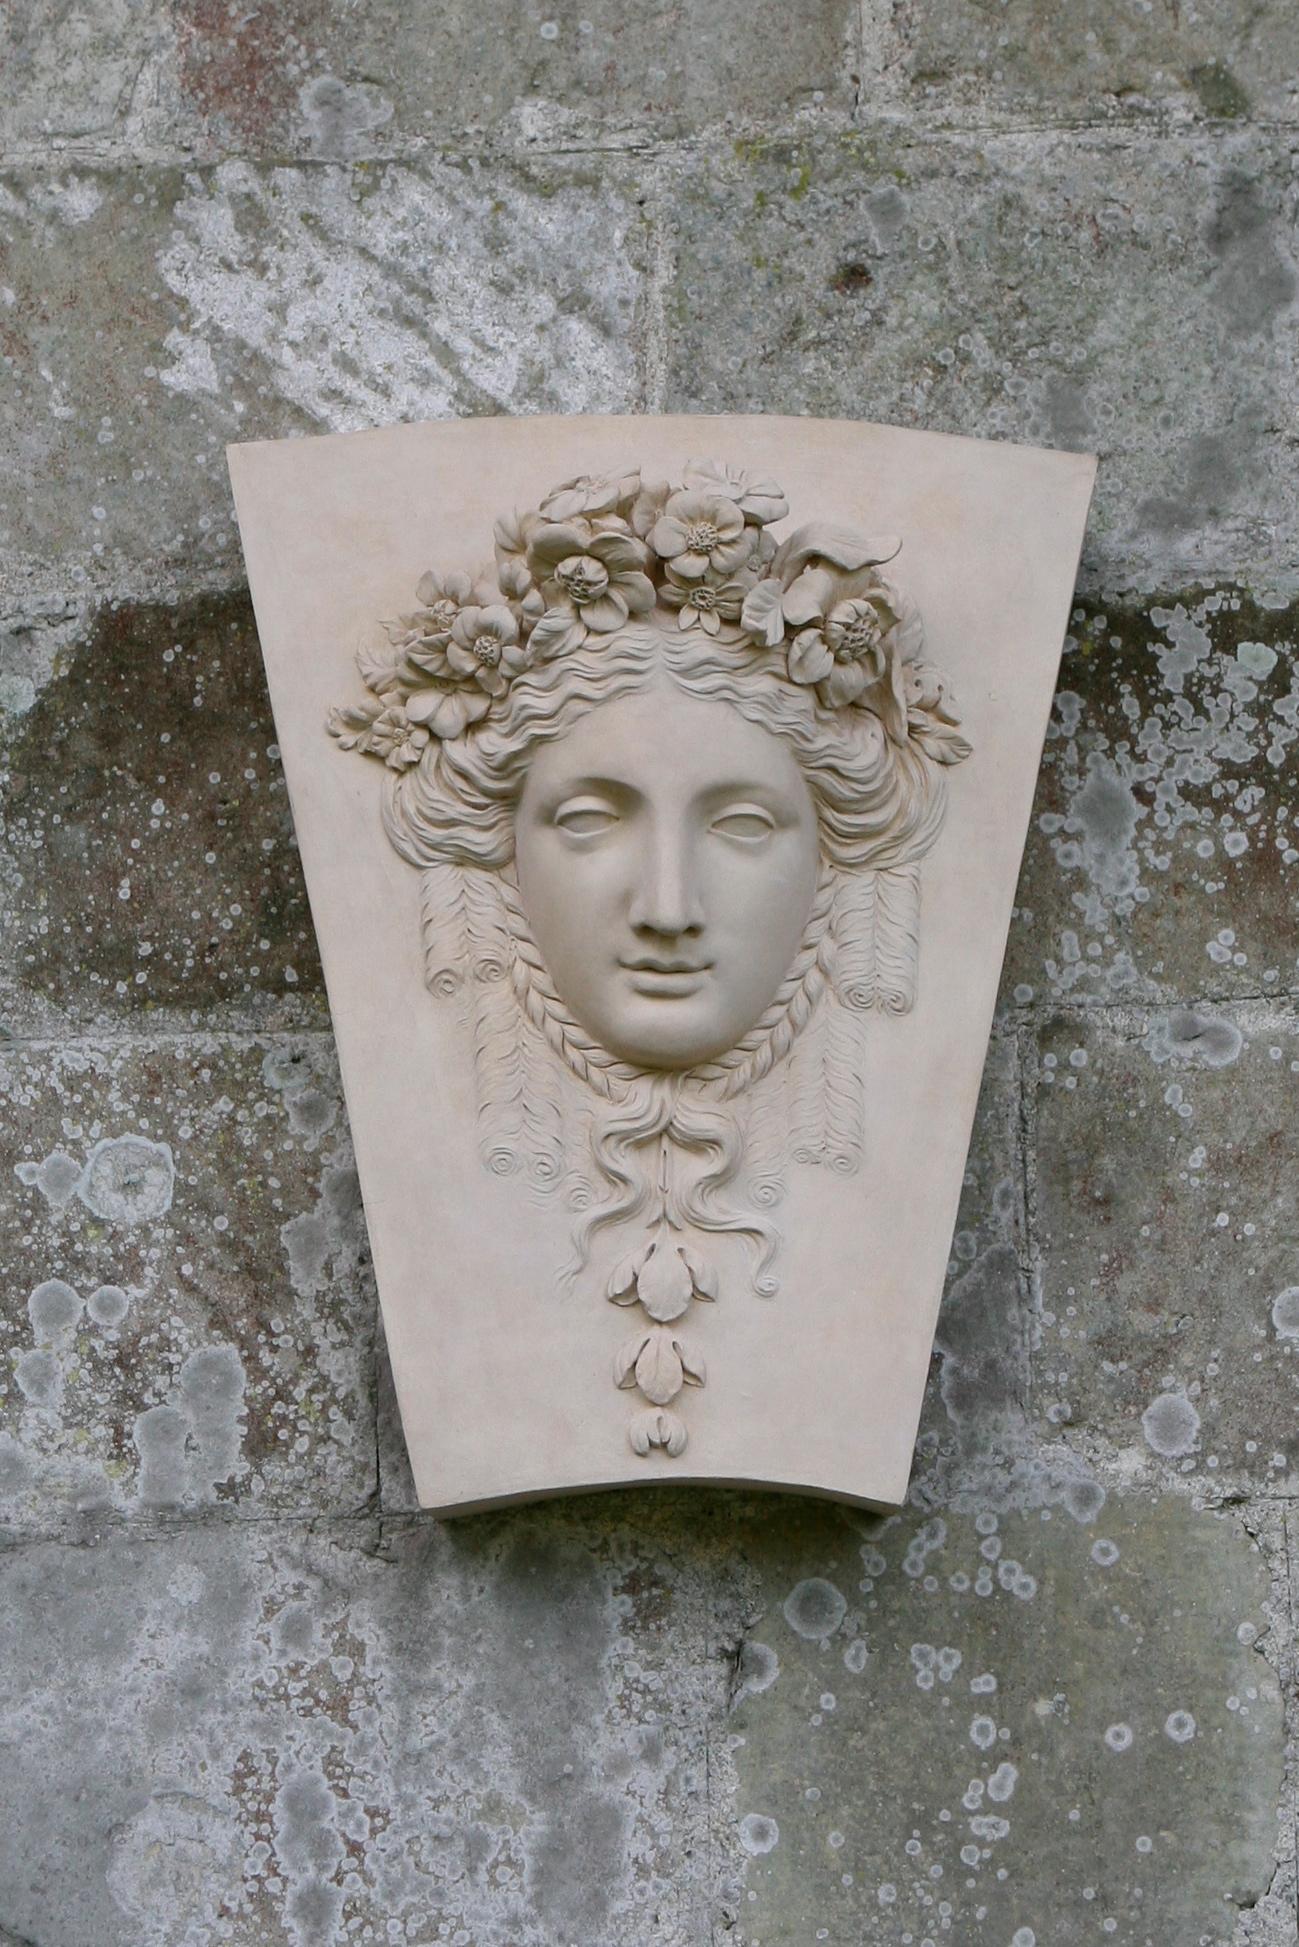 The Keystone featuring the female head of Flora draws its inspiration from an original 18th-century creation Coade. The depiction showcases Flora with plaited hair, backed by elegant drapery. Keystones similar to this can be found adorning the tops